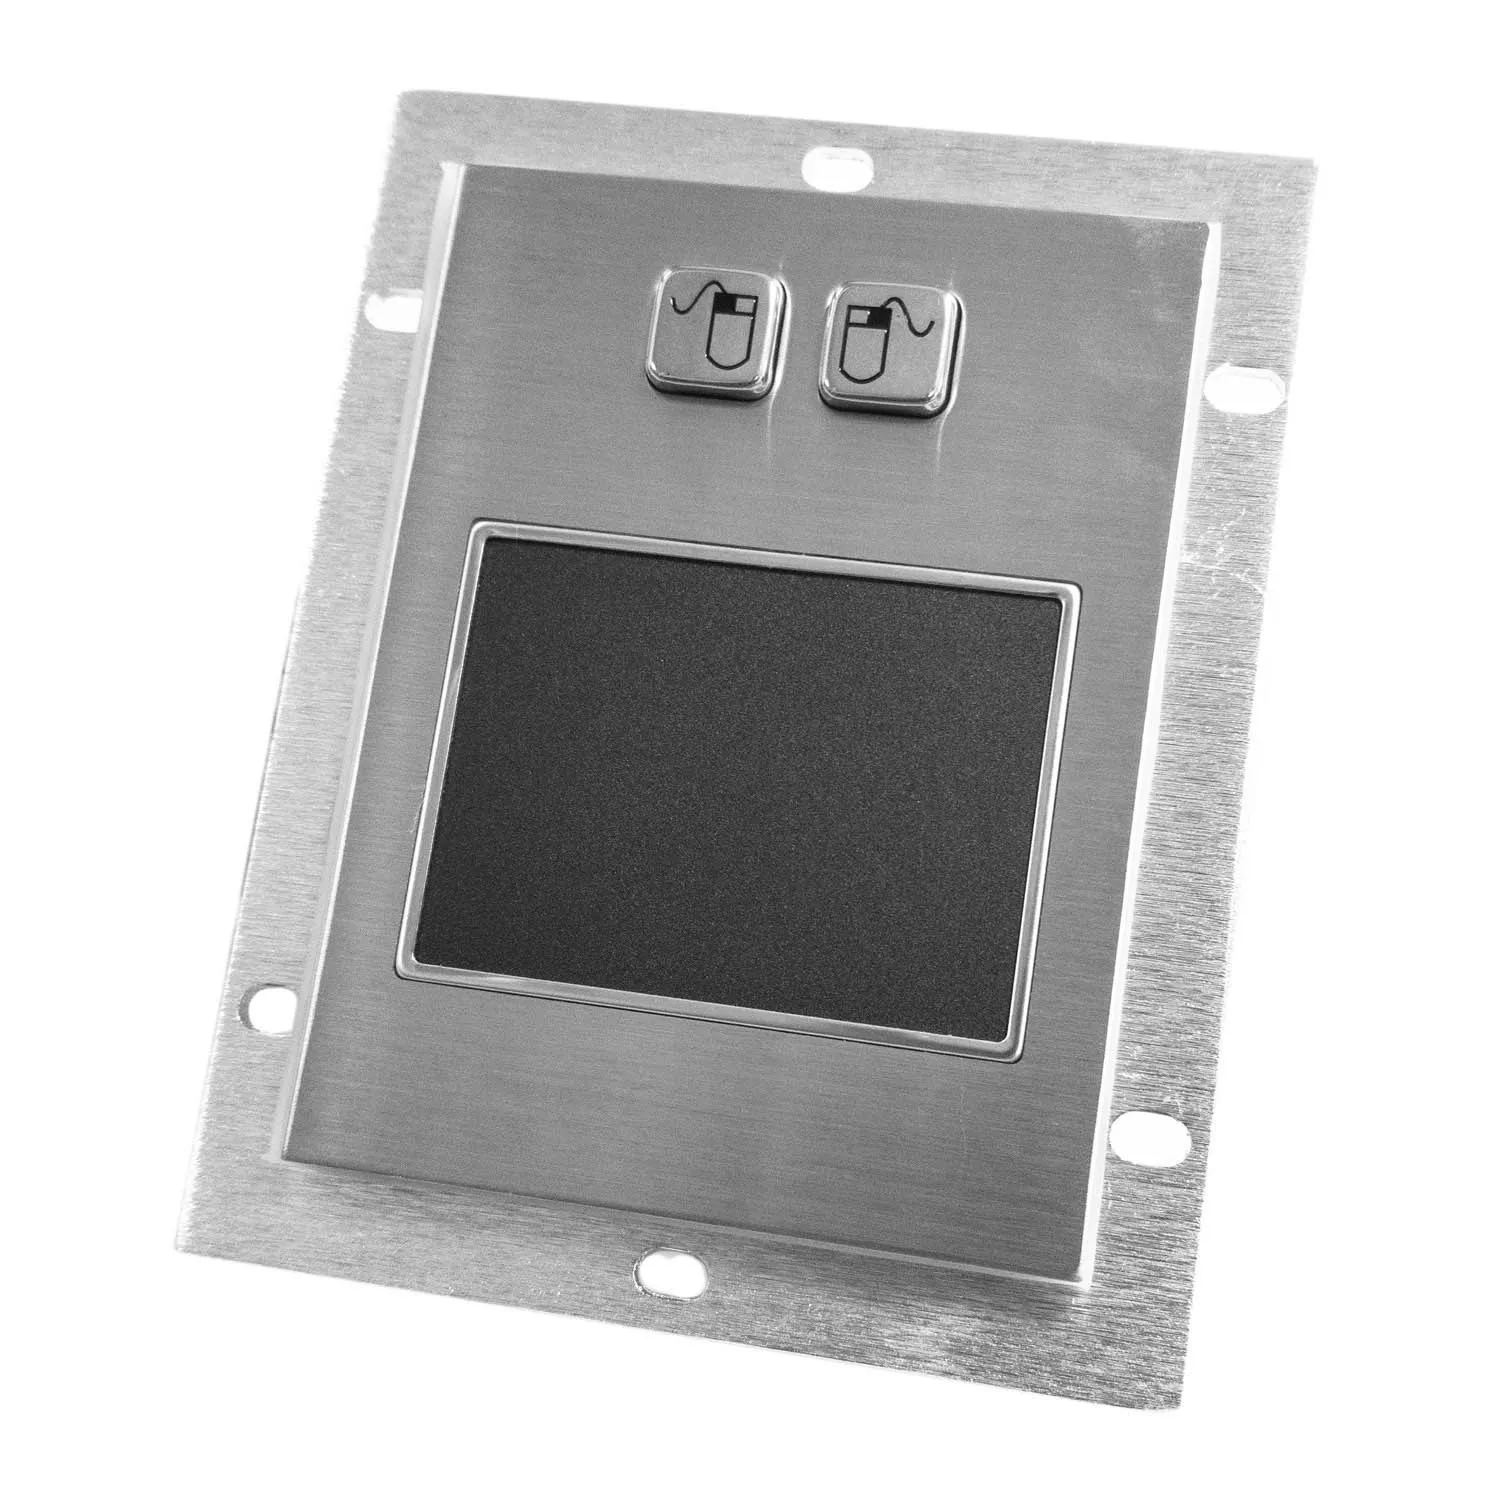 Vandal-proof panel mount touchpad KL-000-NW0S003